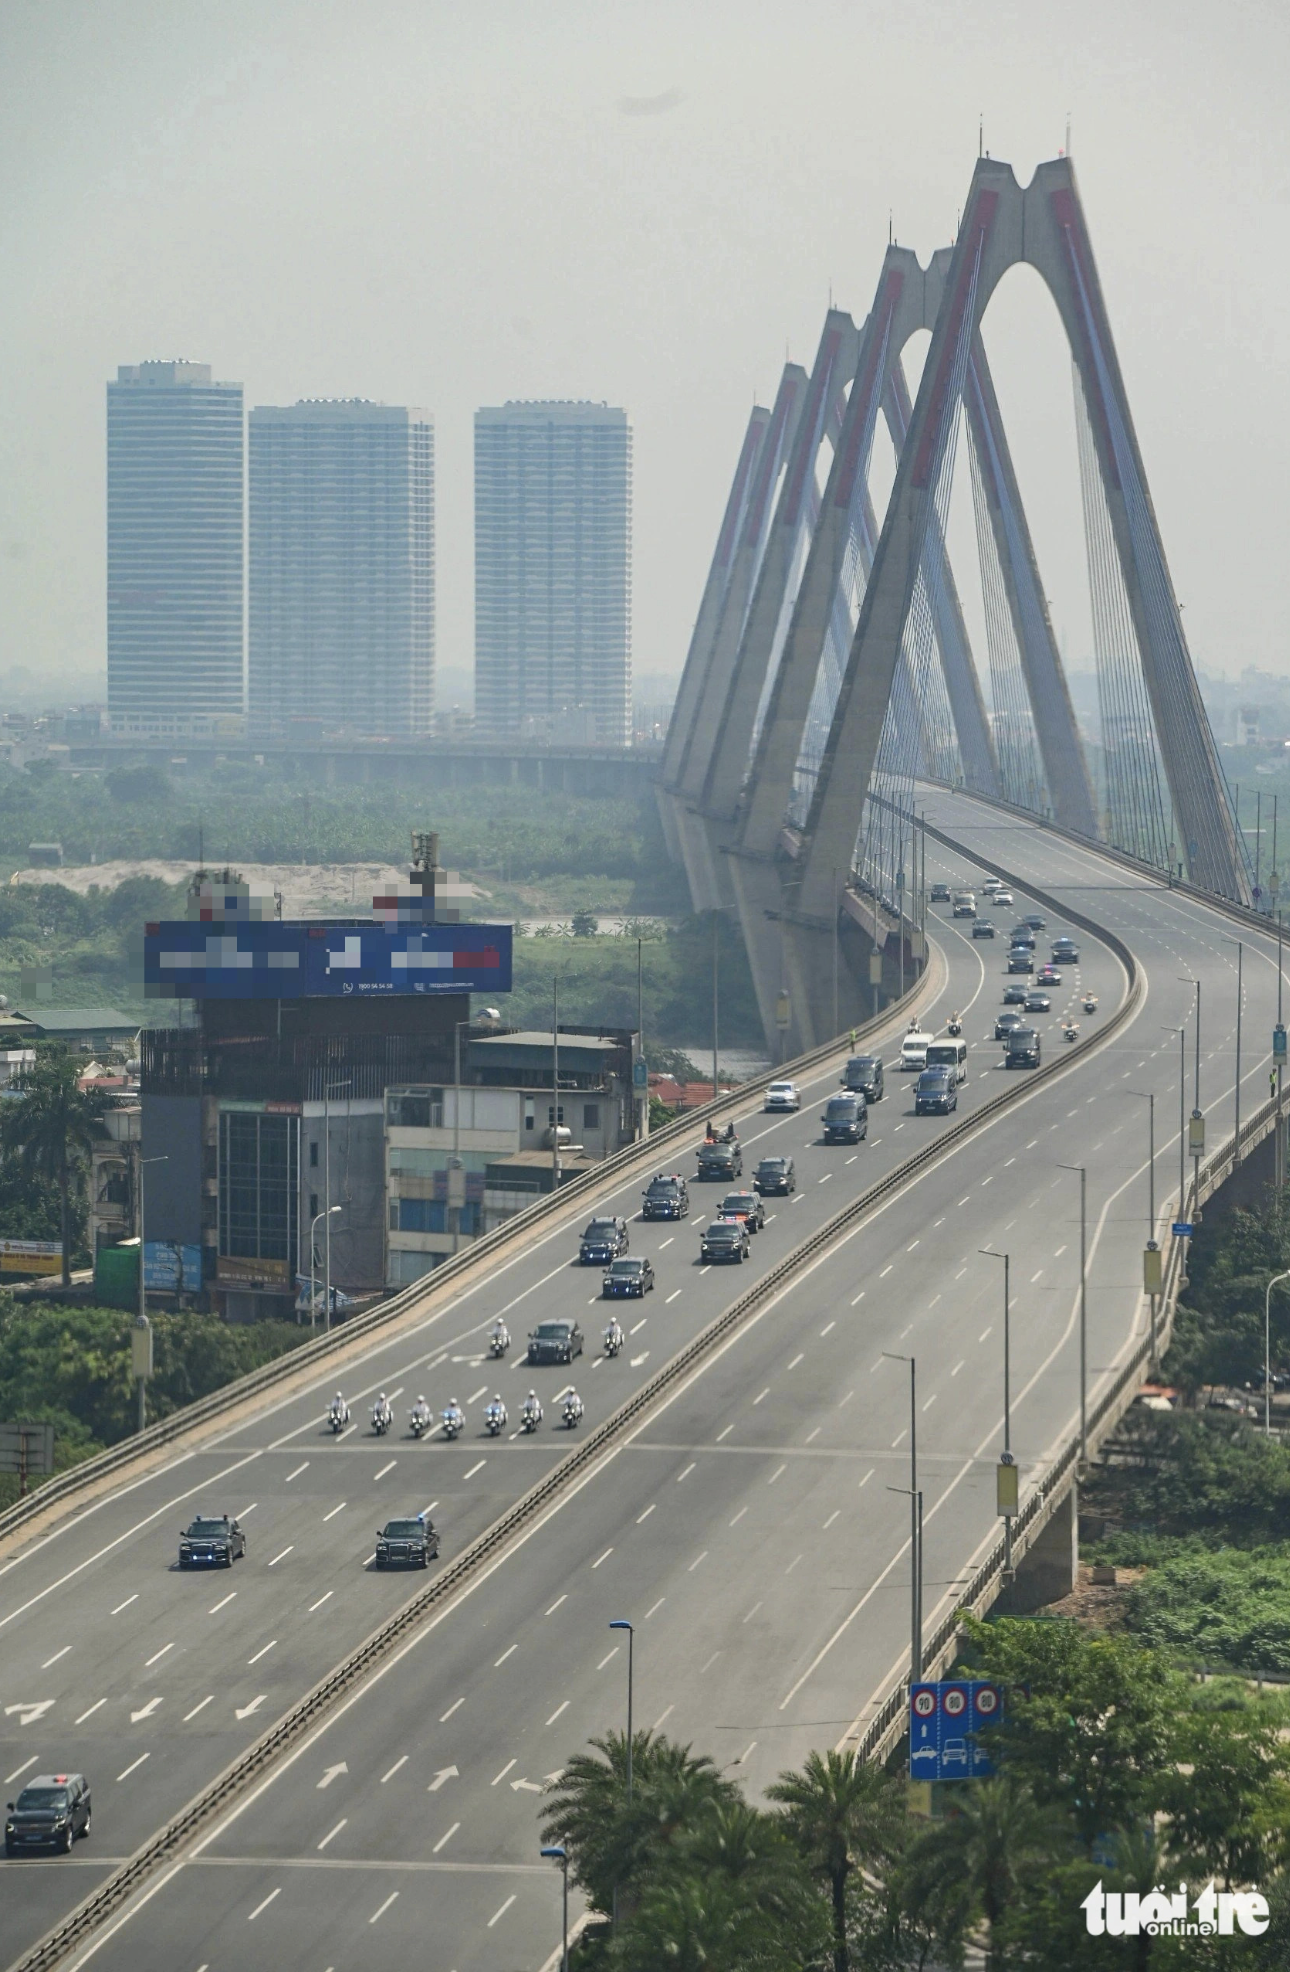 A convoy of cars and motorcycles runs on a bridge in Hanoi to start a rehearsal ahead of Russian President Putin’s visit to Vietnam. Photo: Hong Quang / Tuoi Tre